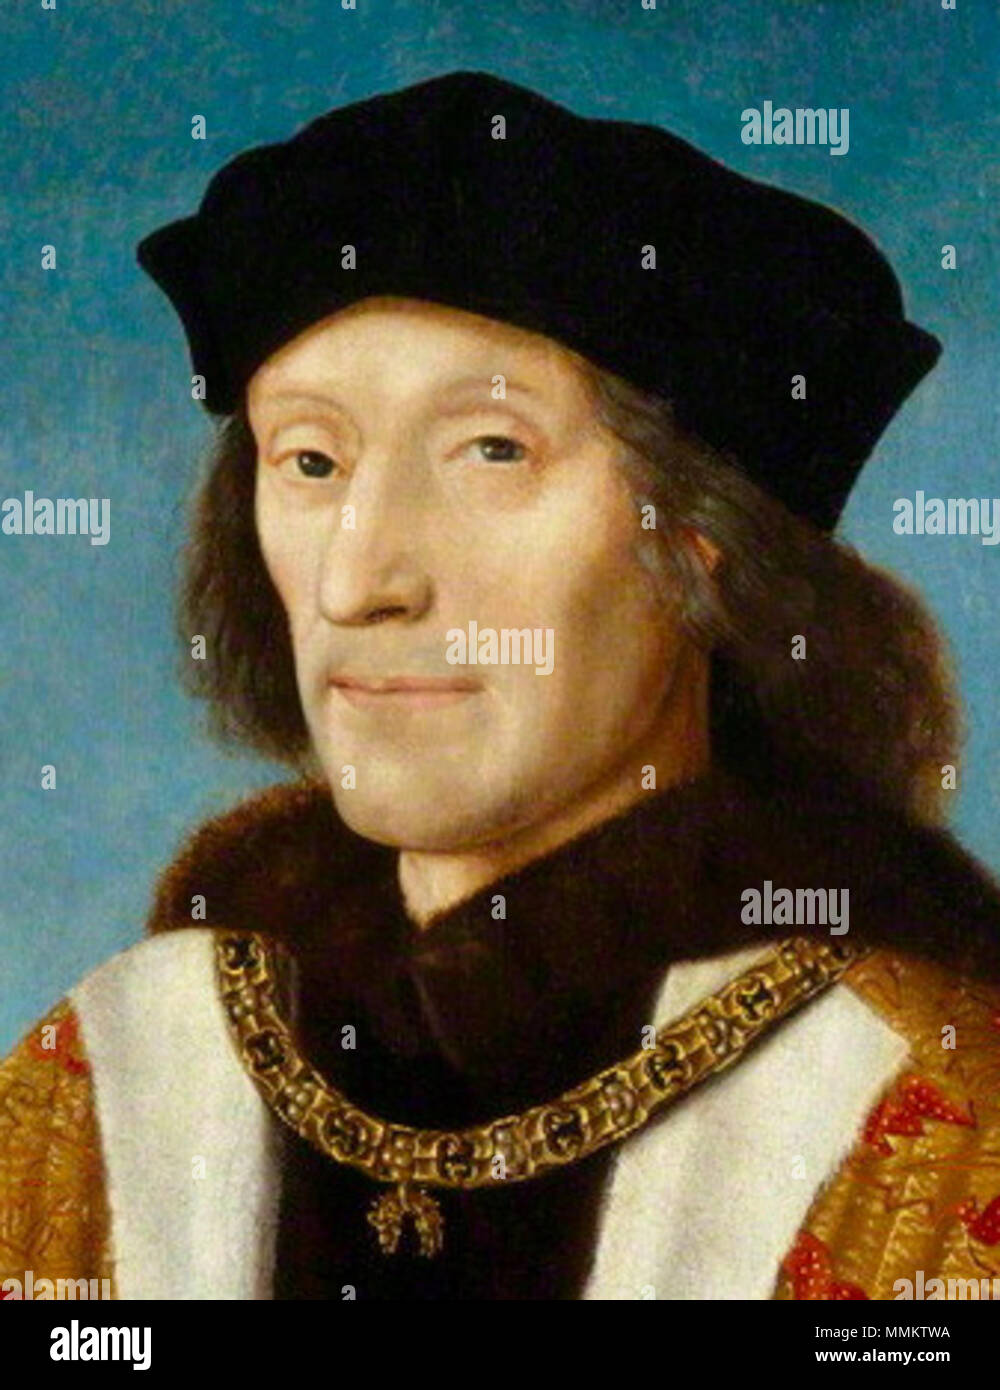 .  English: Portrait clutching the red rose of the house of Lancaster and wearing the collar of the Order of the Golden Fleece, arched top; Text from NPG catalogue: 'This impressive portrait is the earliest painting in the National Portrait Gallery's collection. The inscription records that the portrait was painted on 29 October 1505 by order of Herman Rinck, an agent for the Holy Roman Emperor, Maximilian I. The portrait was probably painted as part of an unsuccessful marriage proposal, as Henry hoped to marry Maximillian's daughter Margaret of Savoy as his second wife'.  by Unknown artist, o Stock Photo